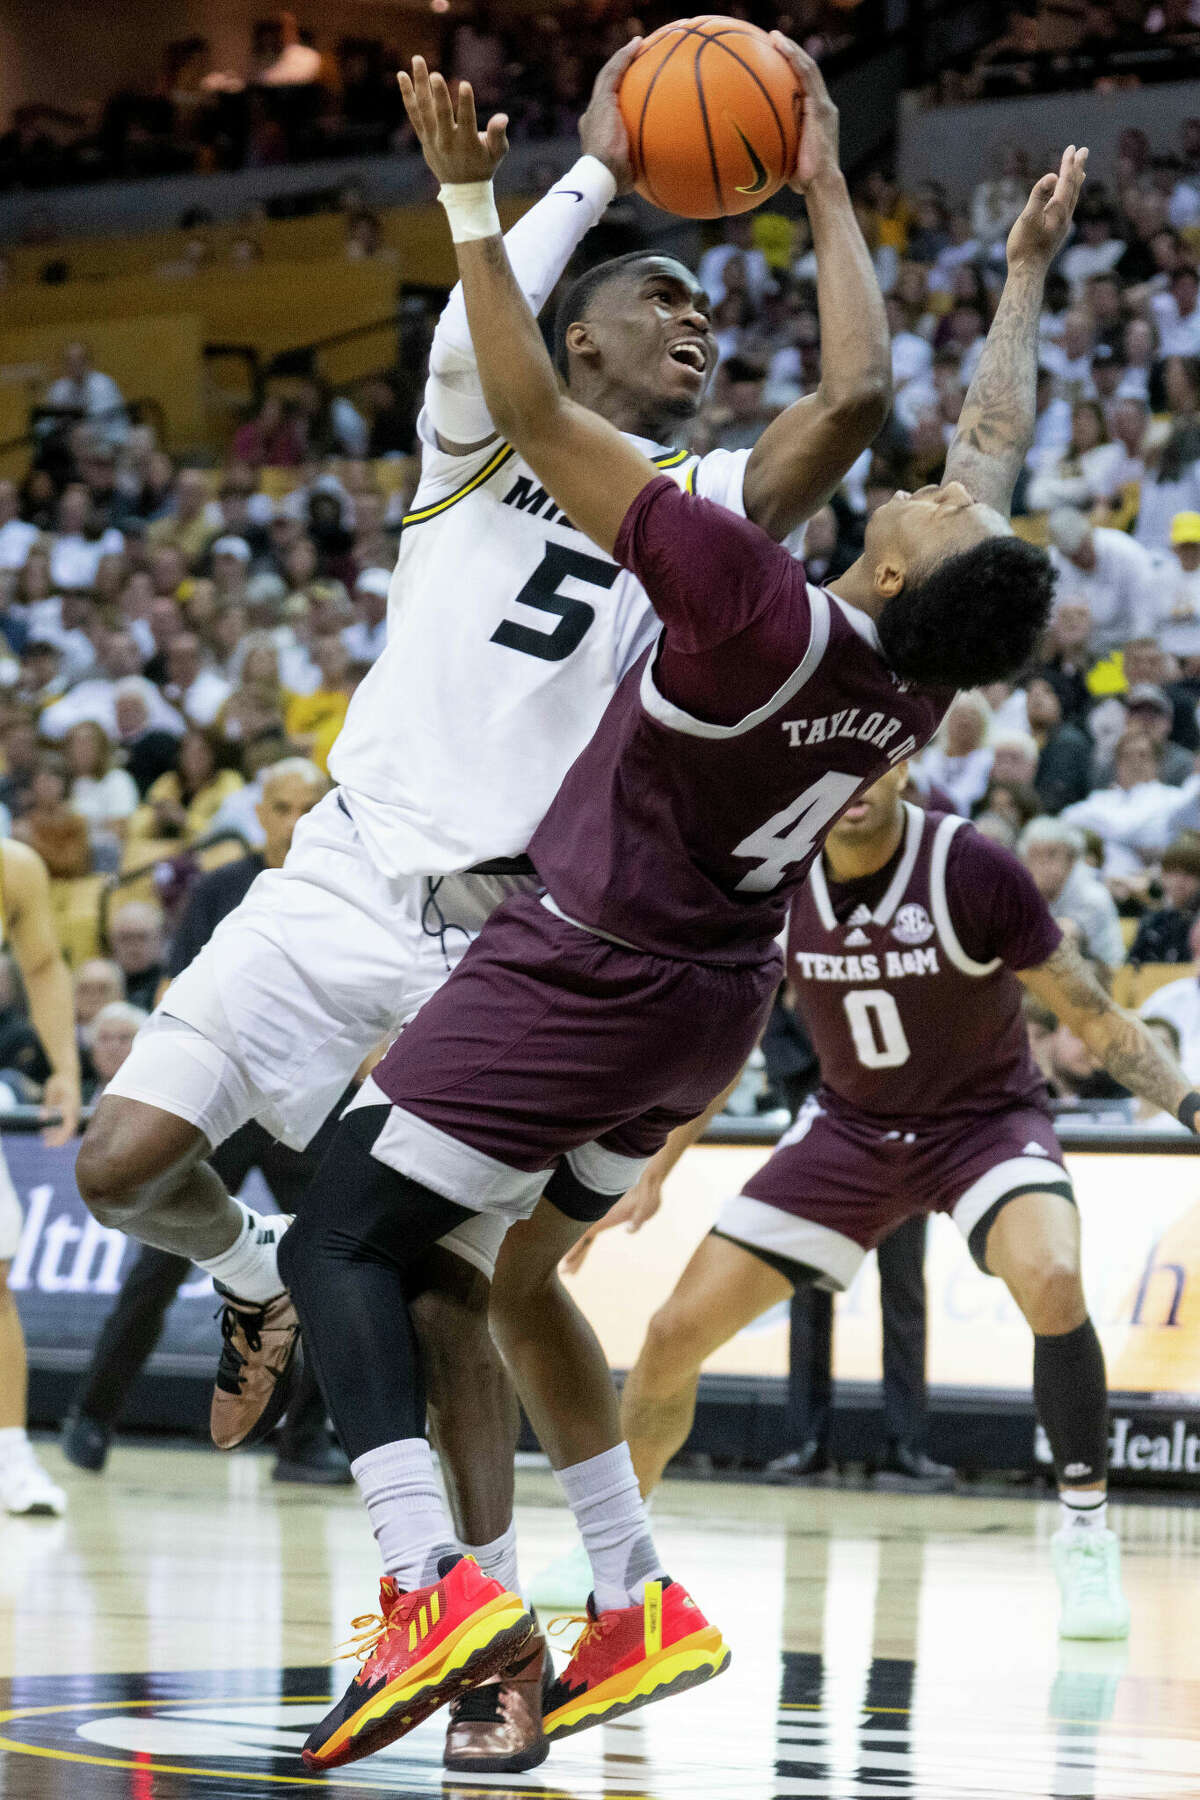 Missouri's D'Moi Hodge, top, shoots over Texas A&M's Wade Taylor IV during the second half of an NCAA college basketball game Saturday, Feb. 18, 2023, in Columbia, Mo. (AP Photo/L.G. Patterson)